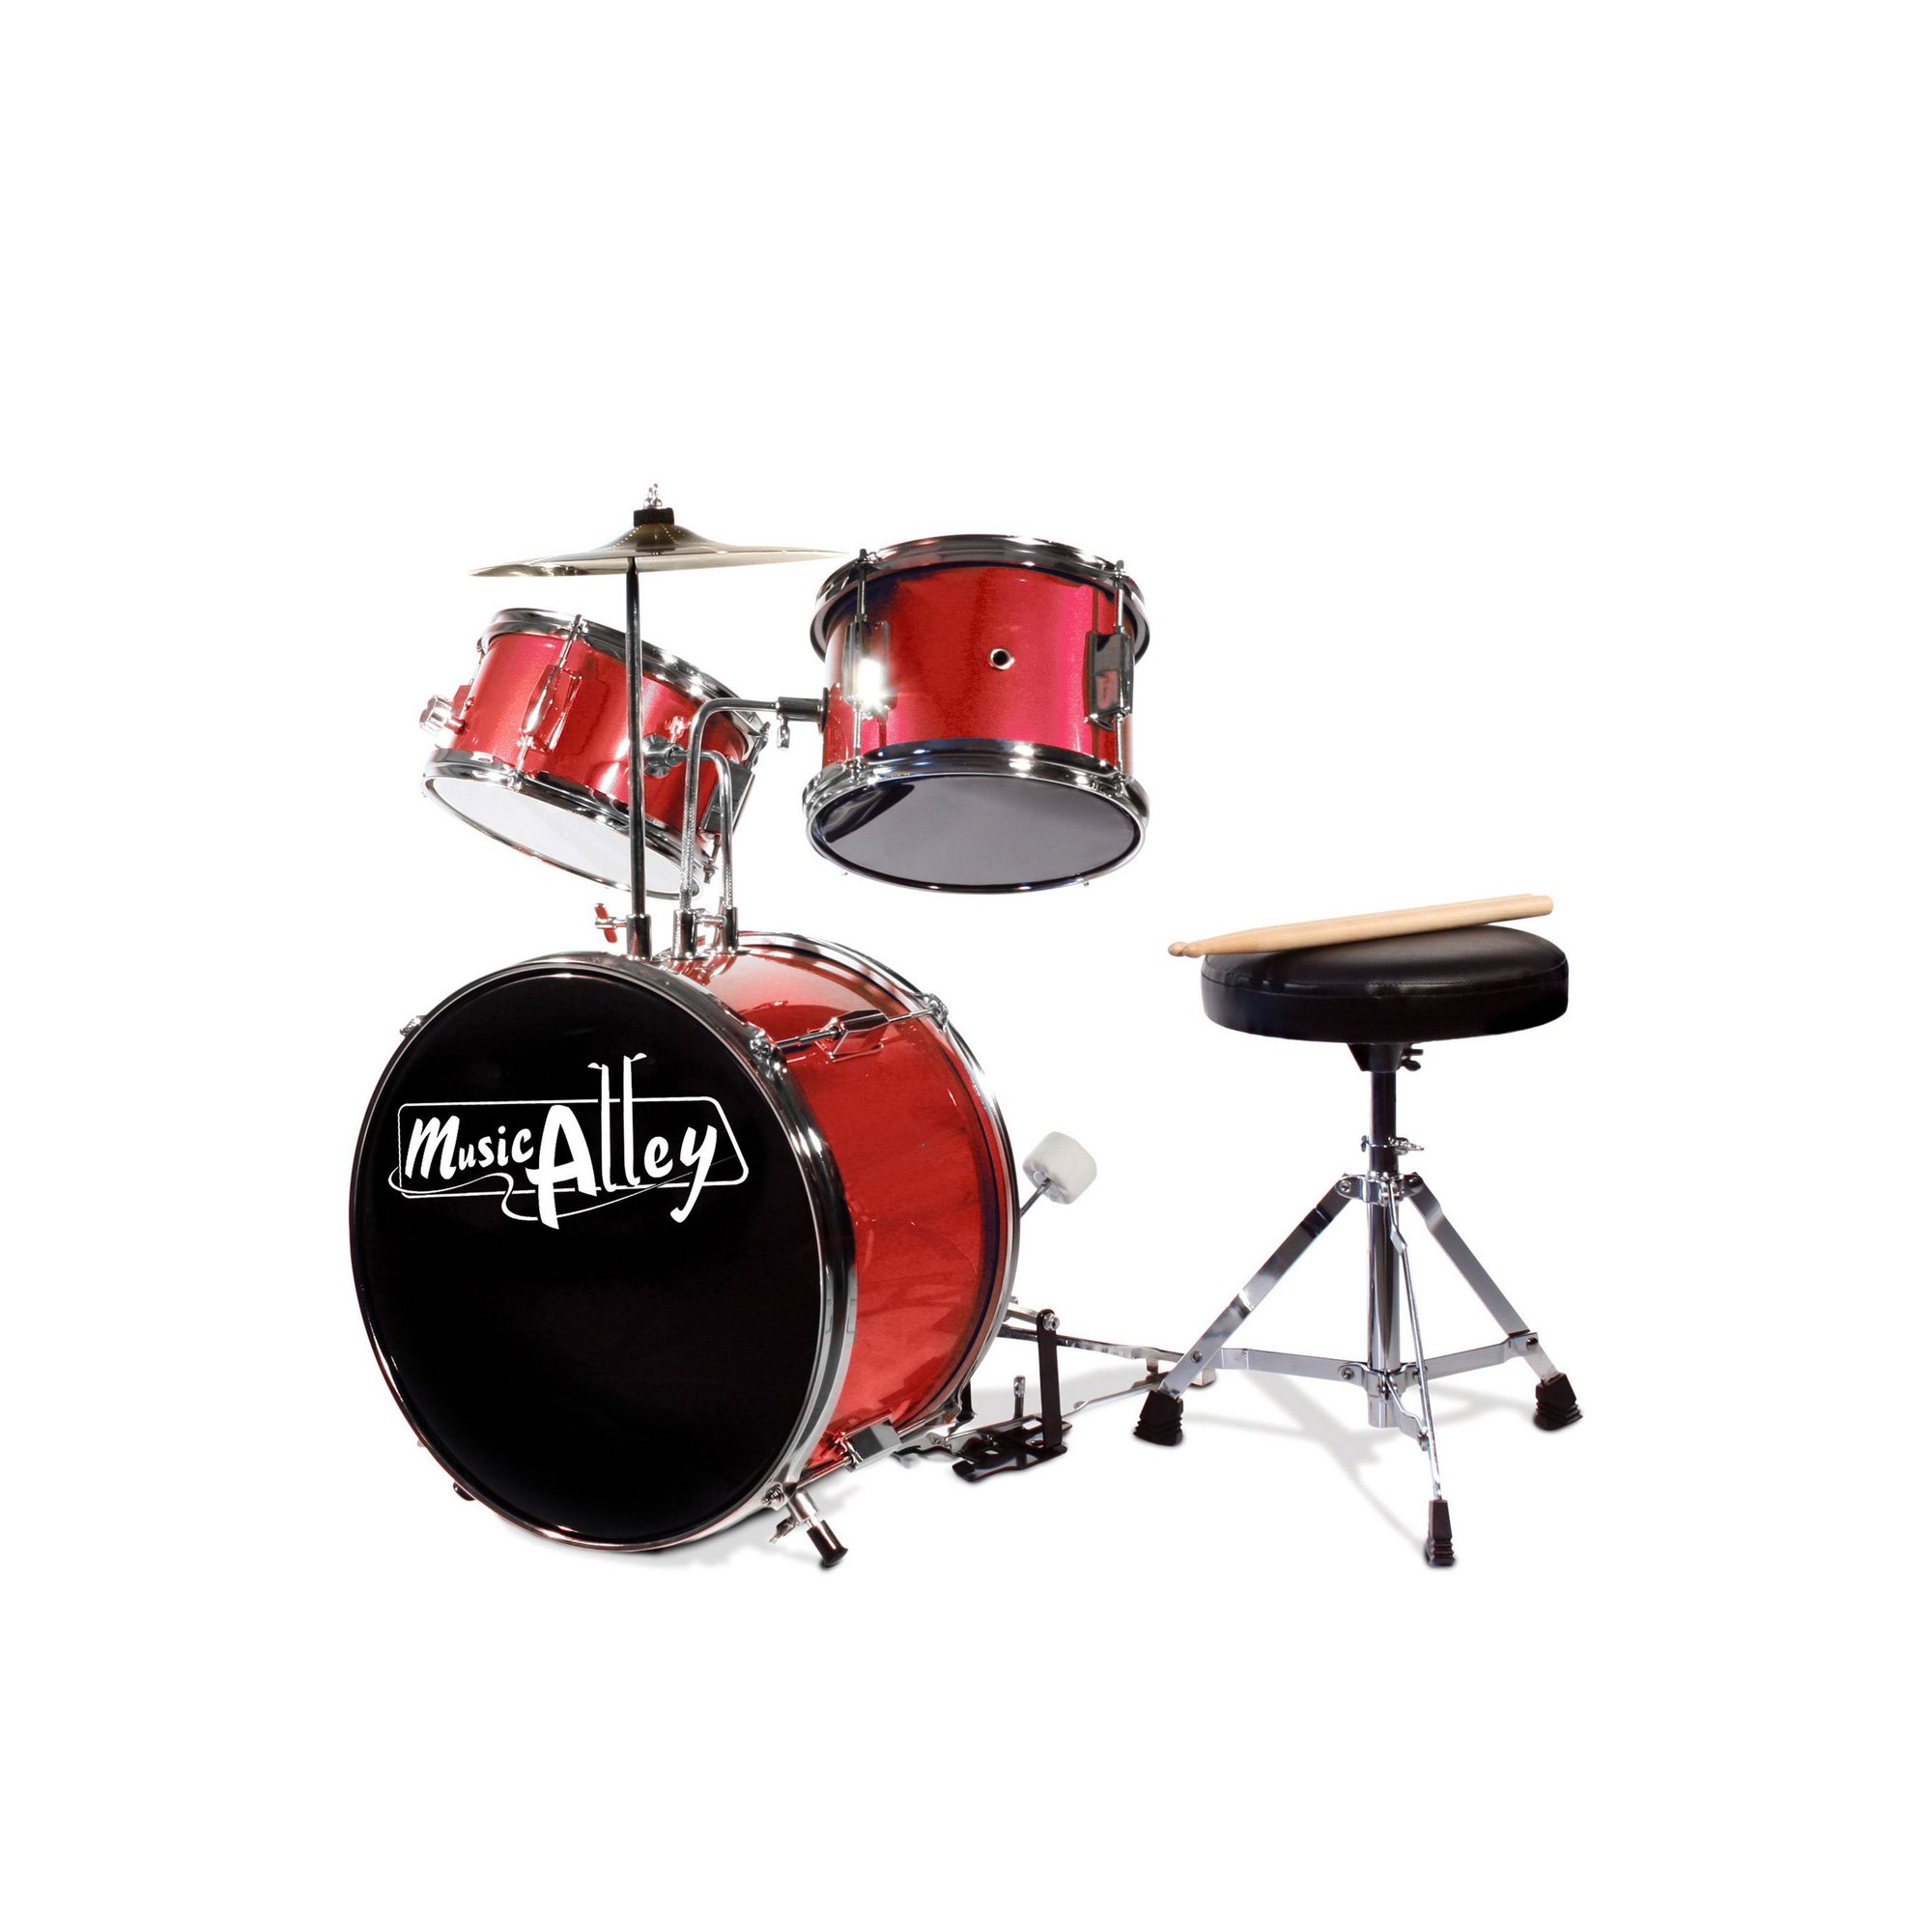 Music Alley Music Alley Junior Drum Kit with Stool and Drum Sticks | Red